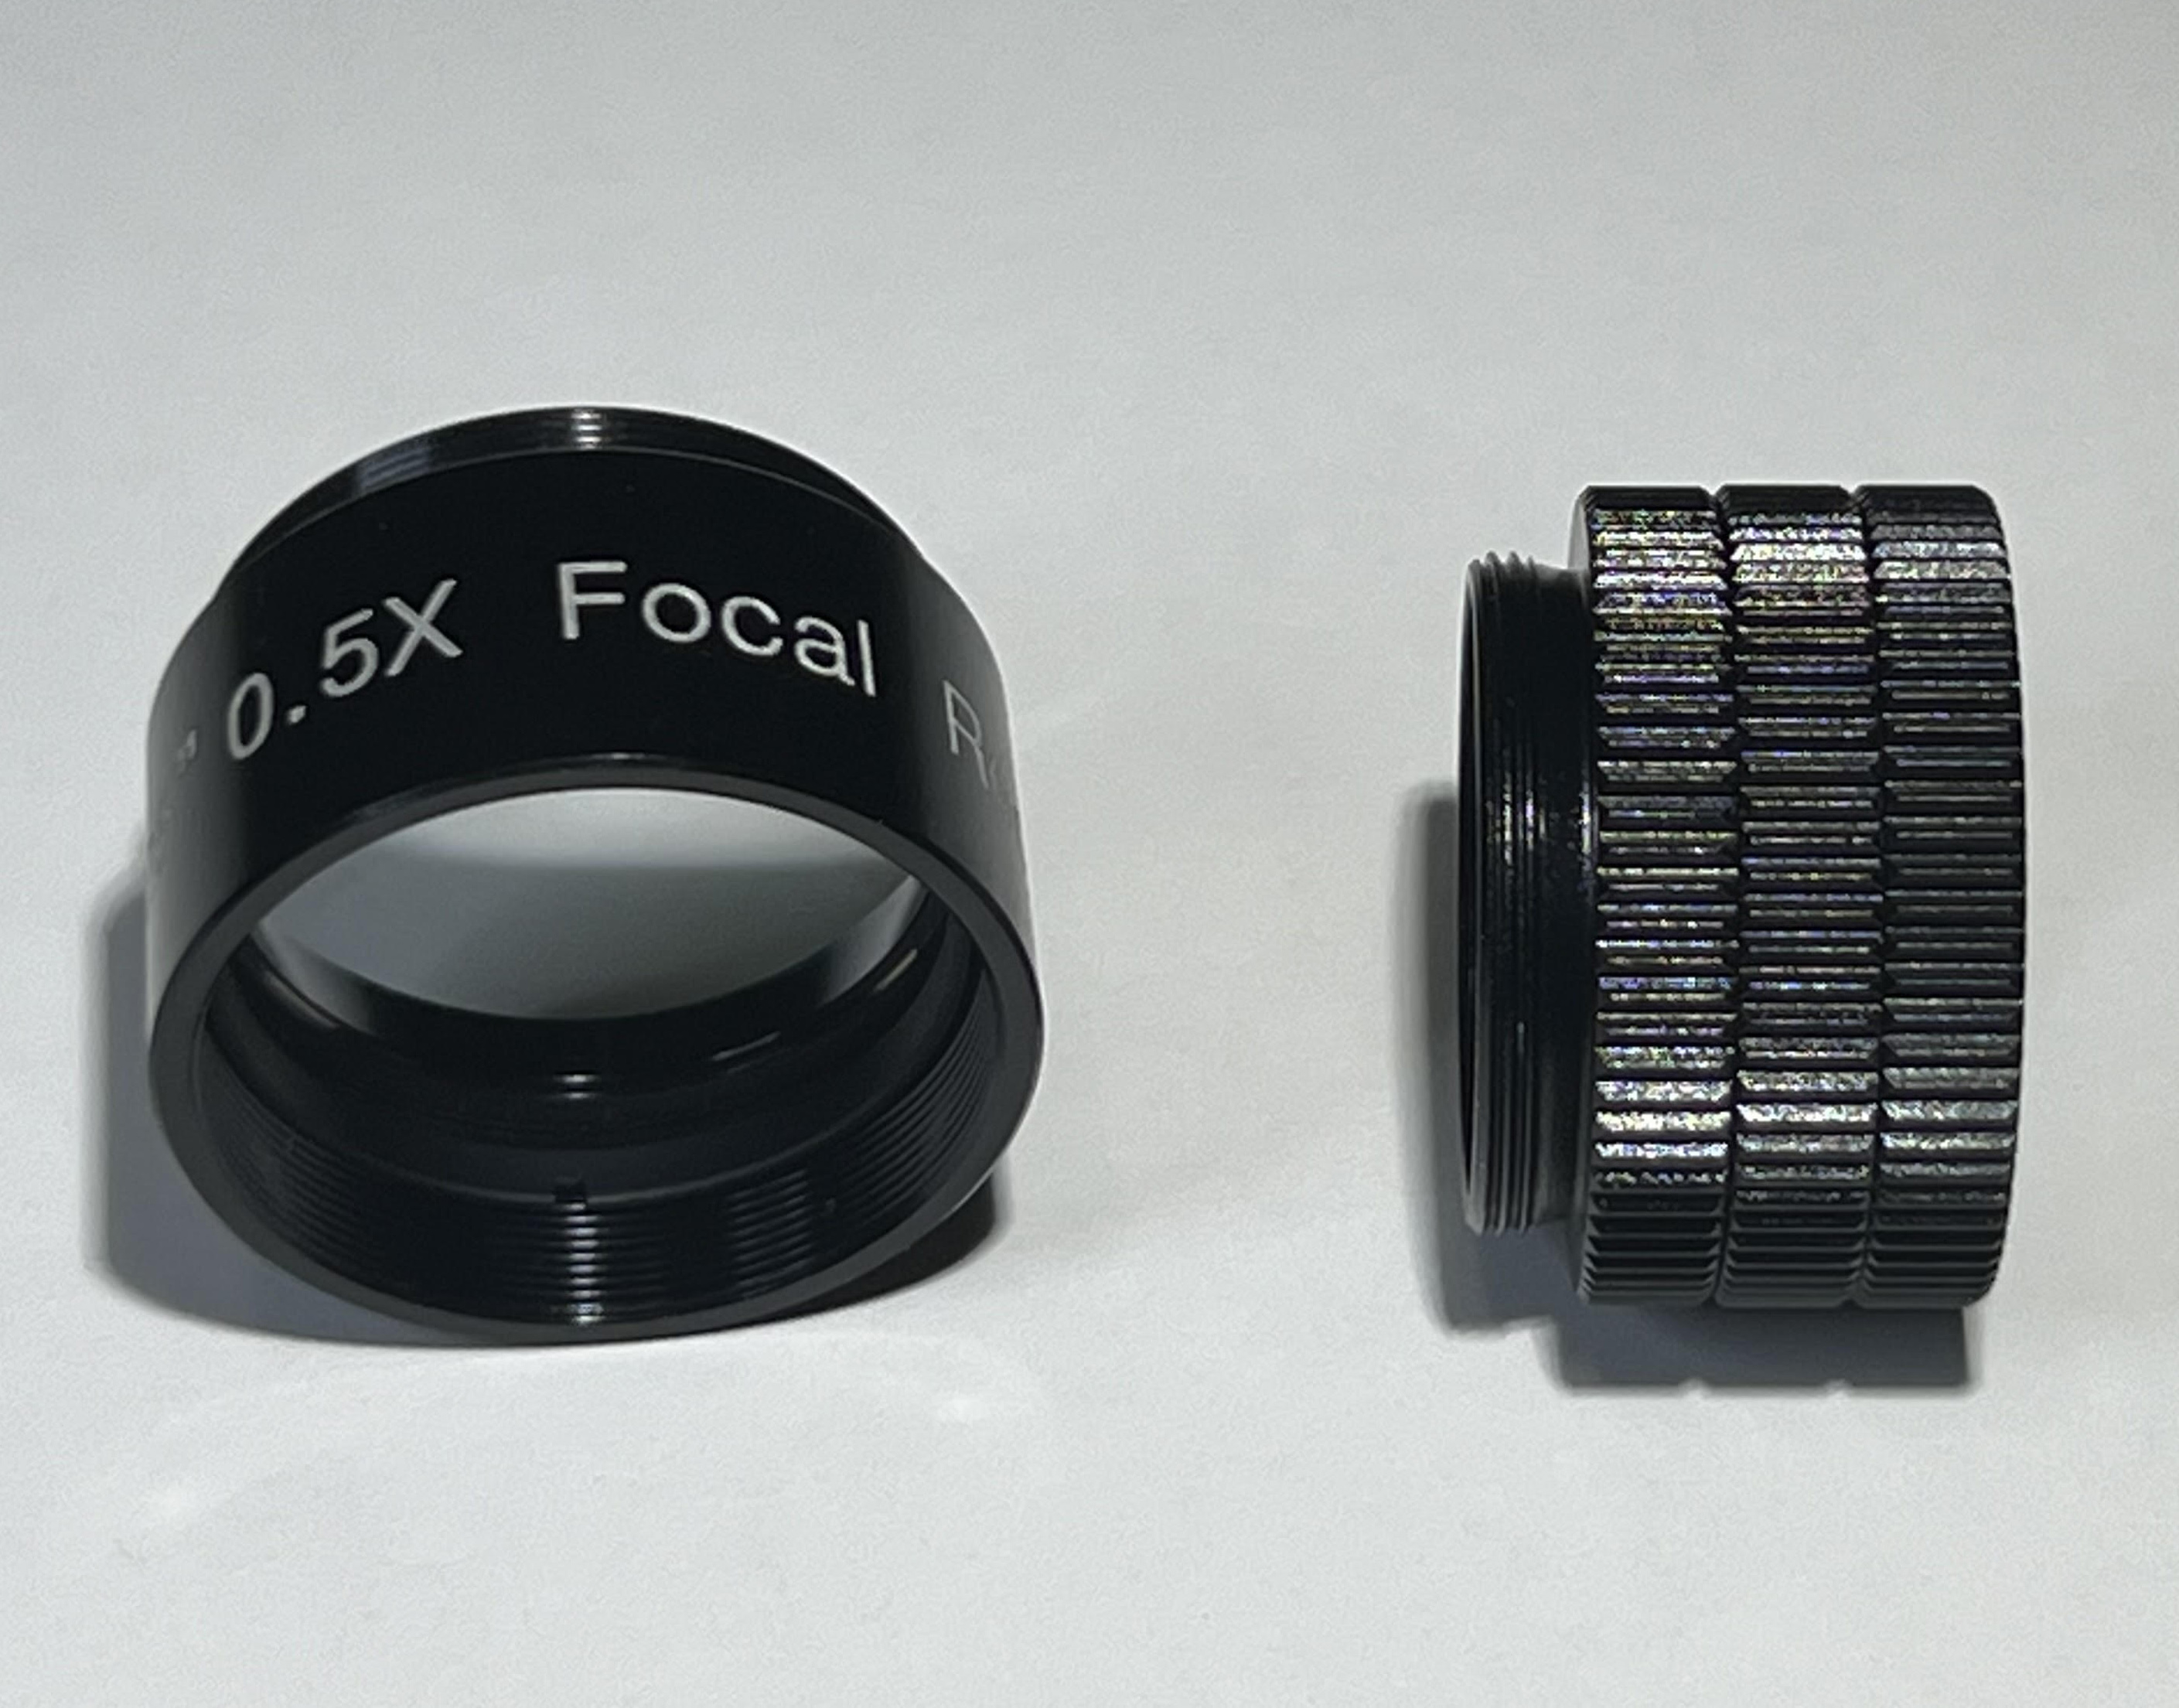 0.5X Focal Reducer and 3 5mm spacers